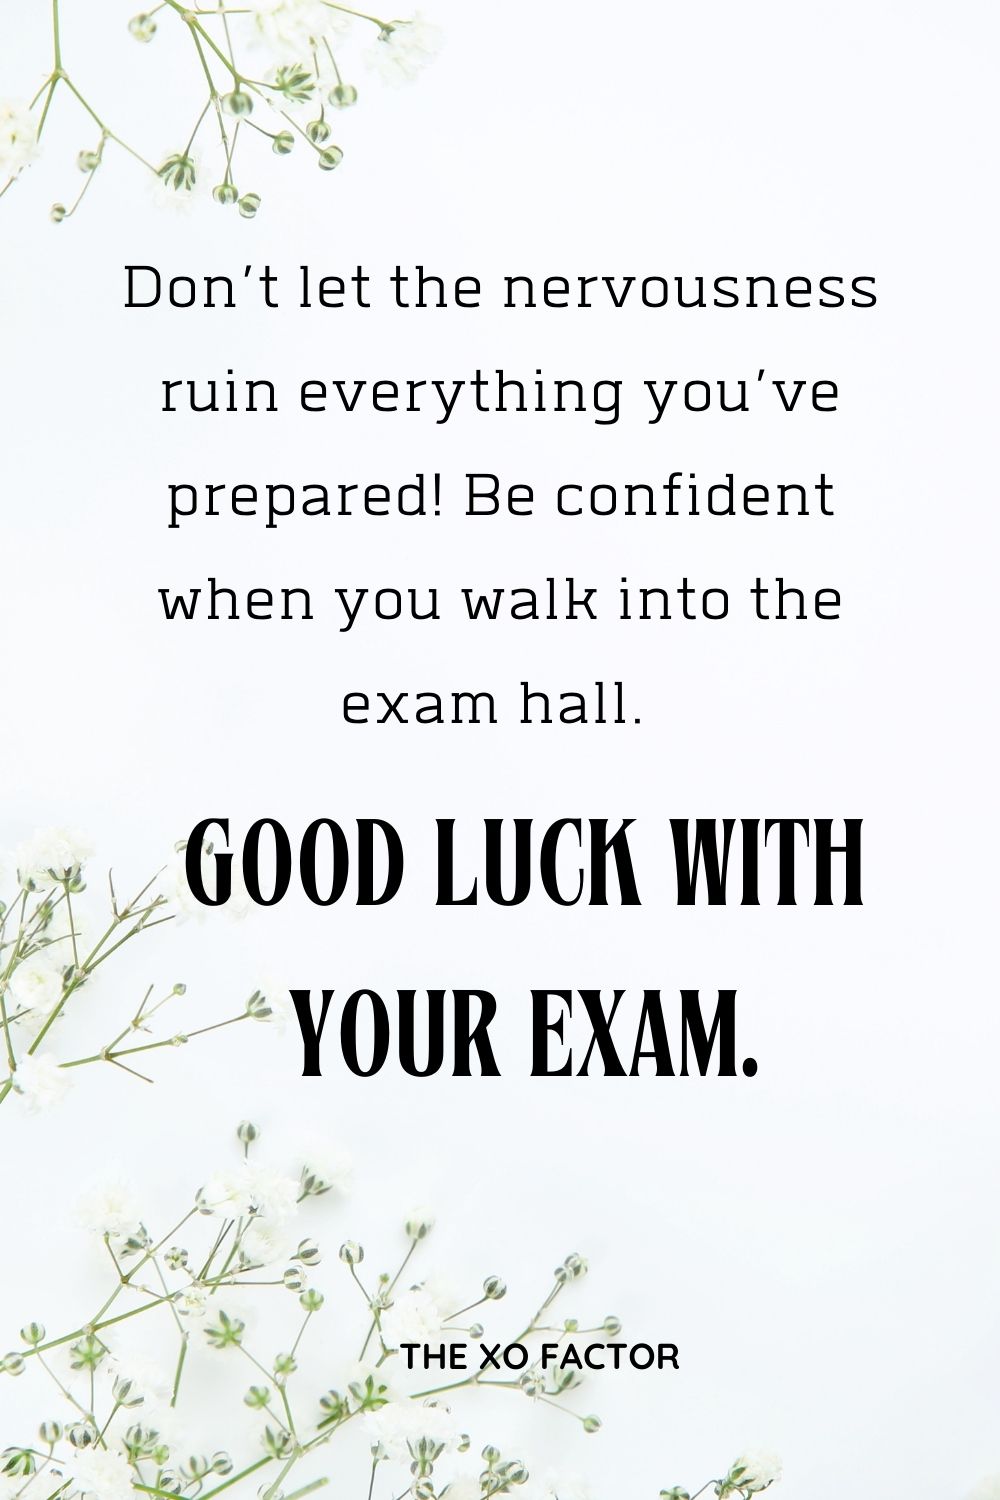 Don’t let the nervousness ruin everything you’ve prepared! Be confident when you walk into the exam hall. Good luck with your exam.